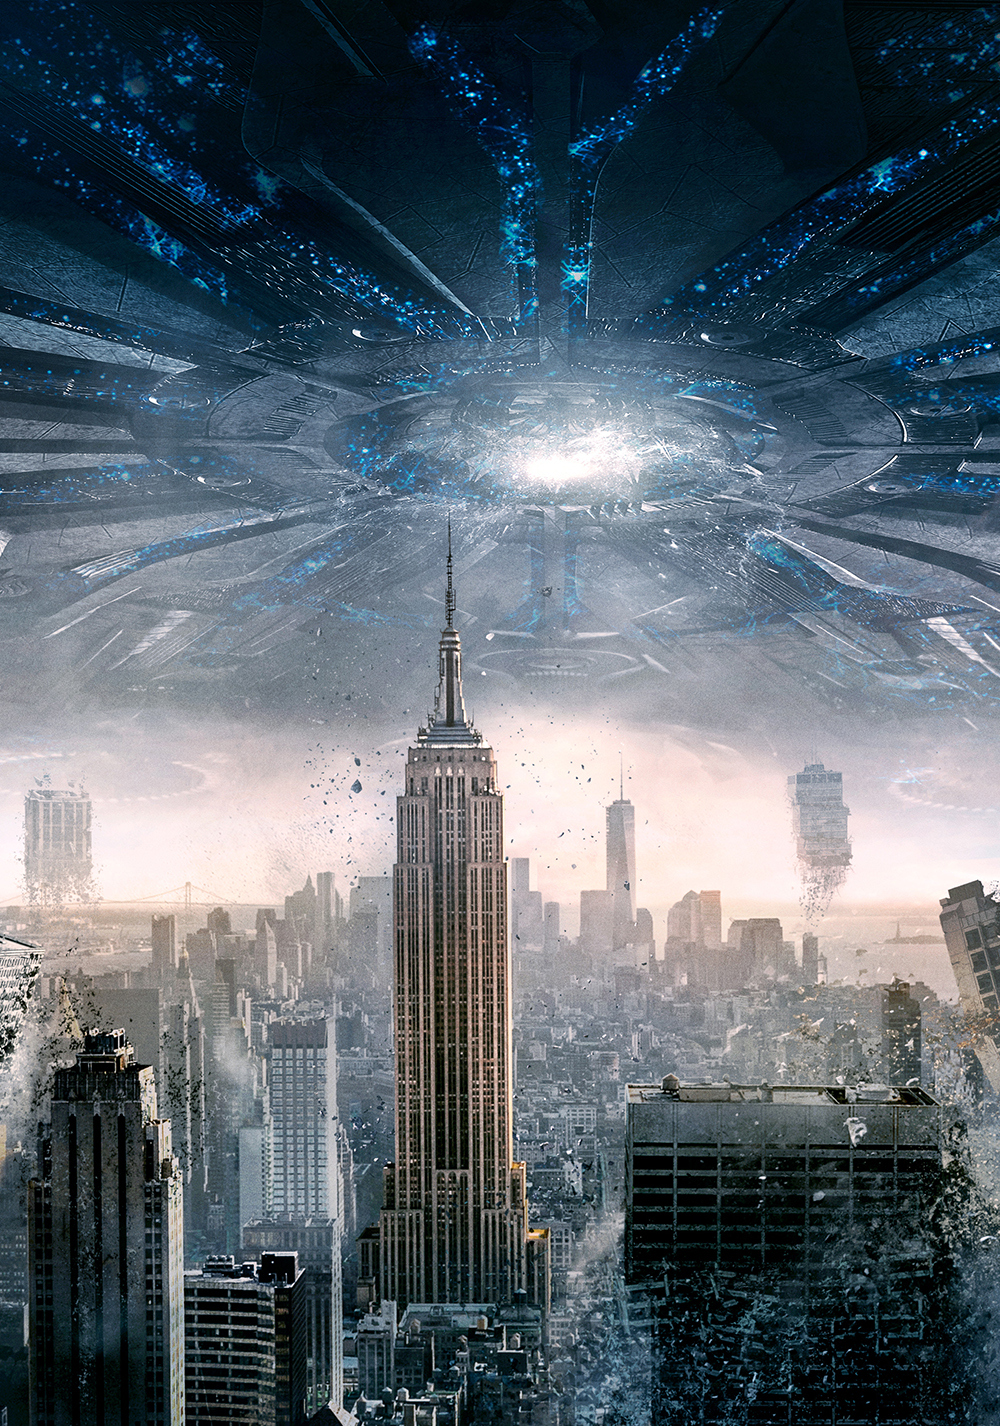 independence day resurgence download full movie